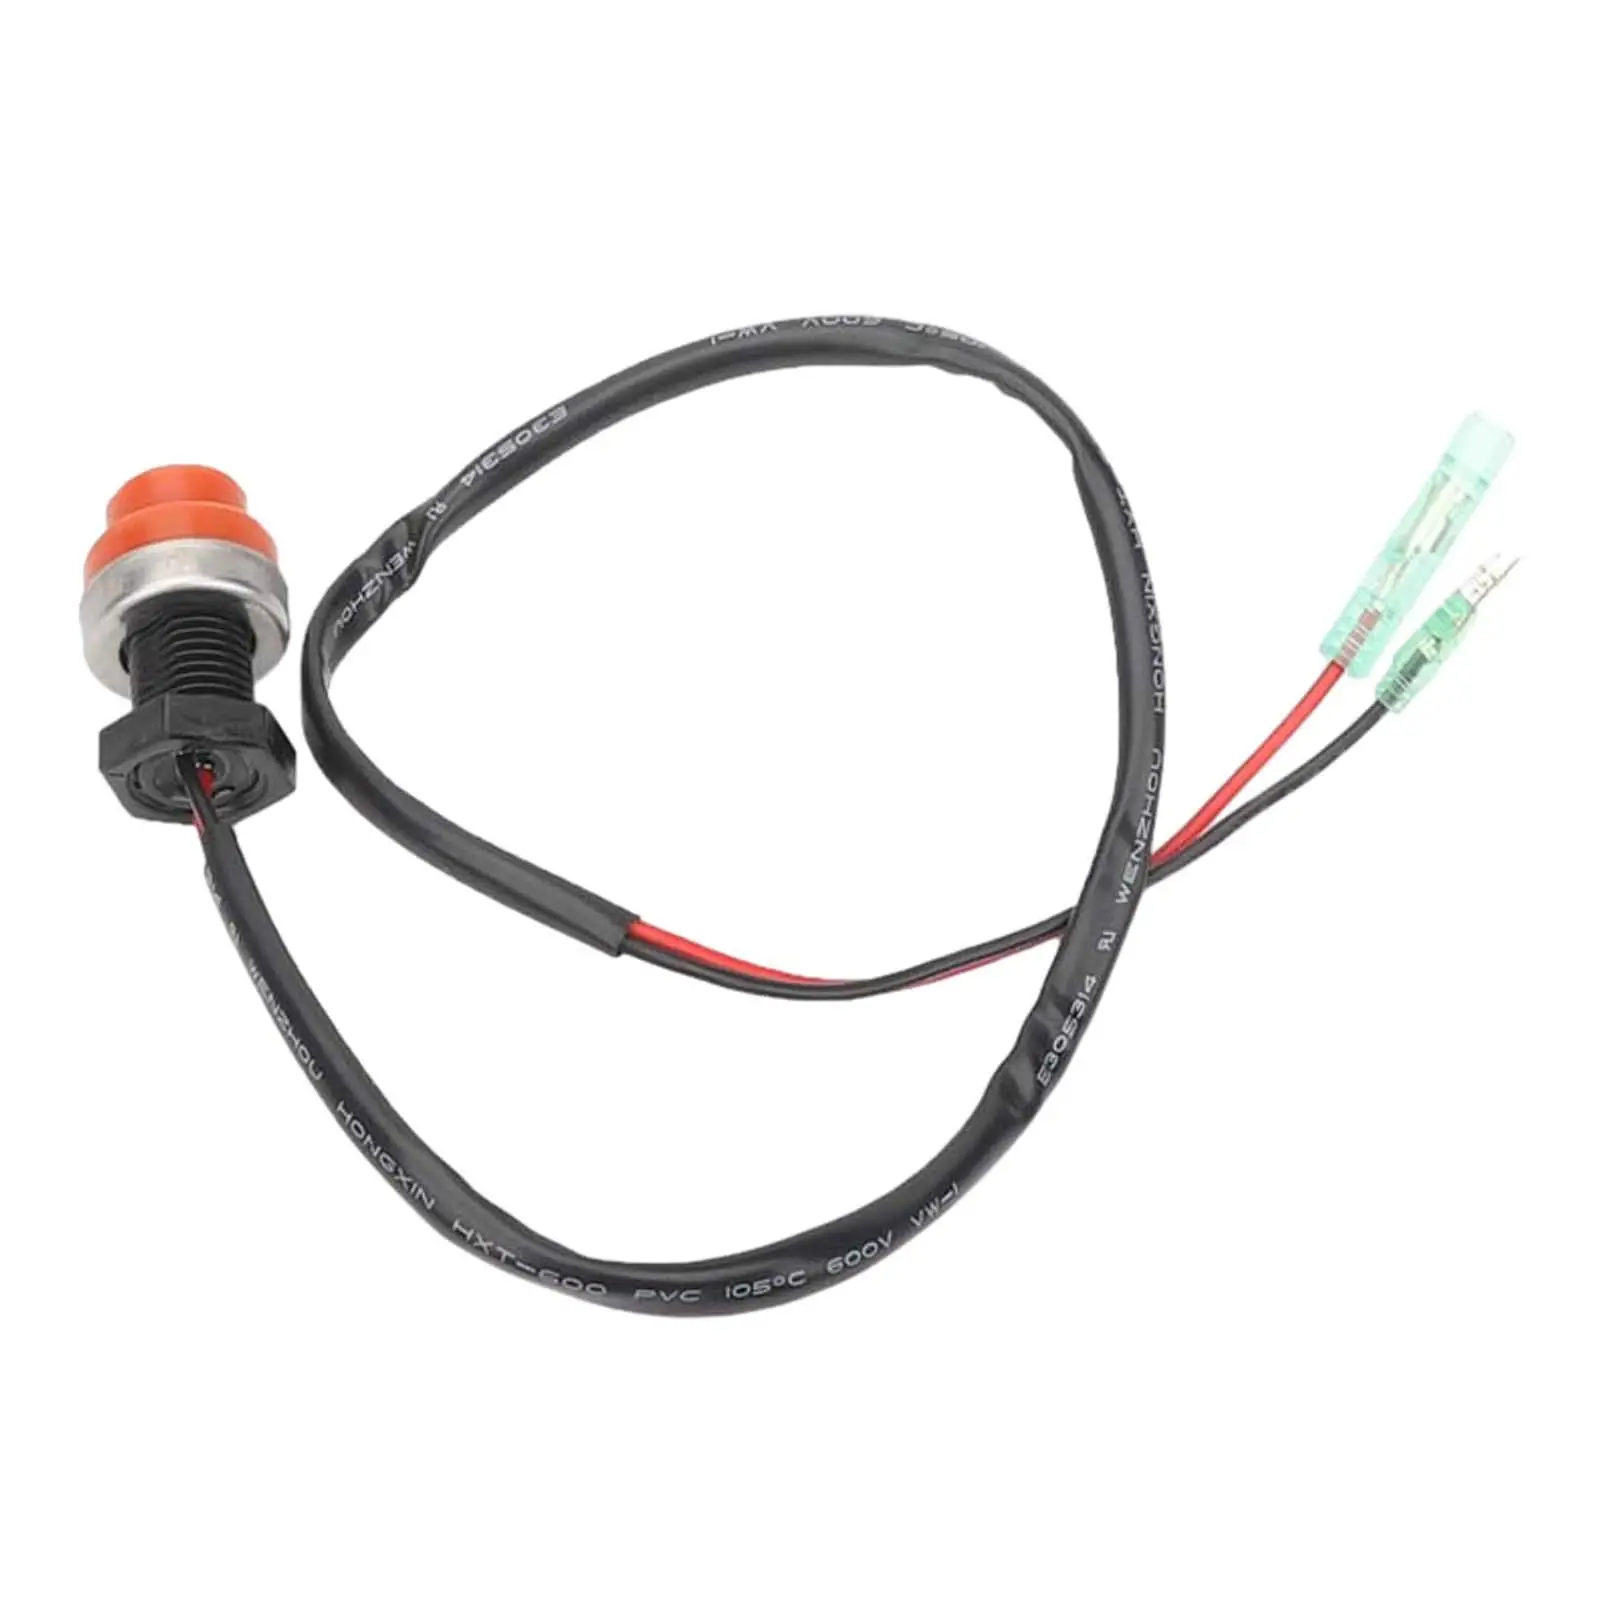 Outboard Start Stop Switch Boat Yachts 55cm Cable Outboard Engine Accessory